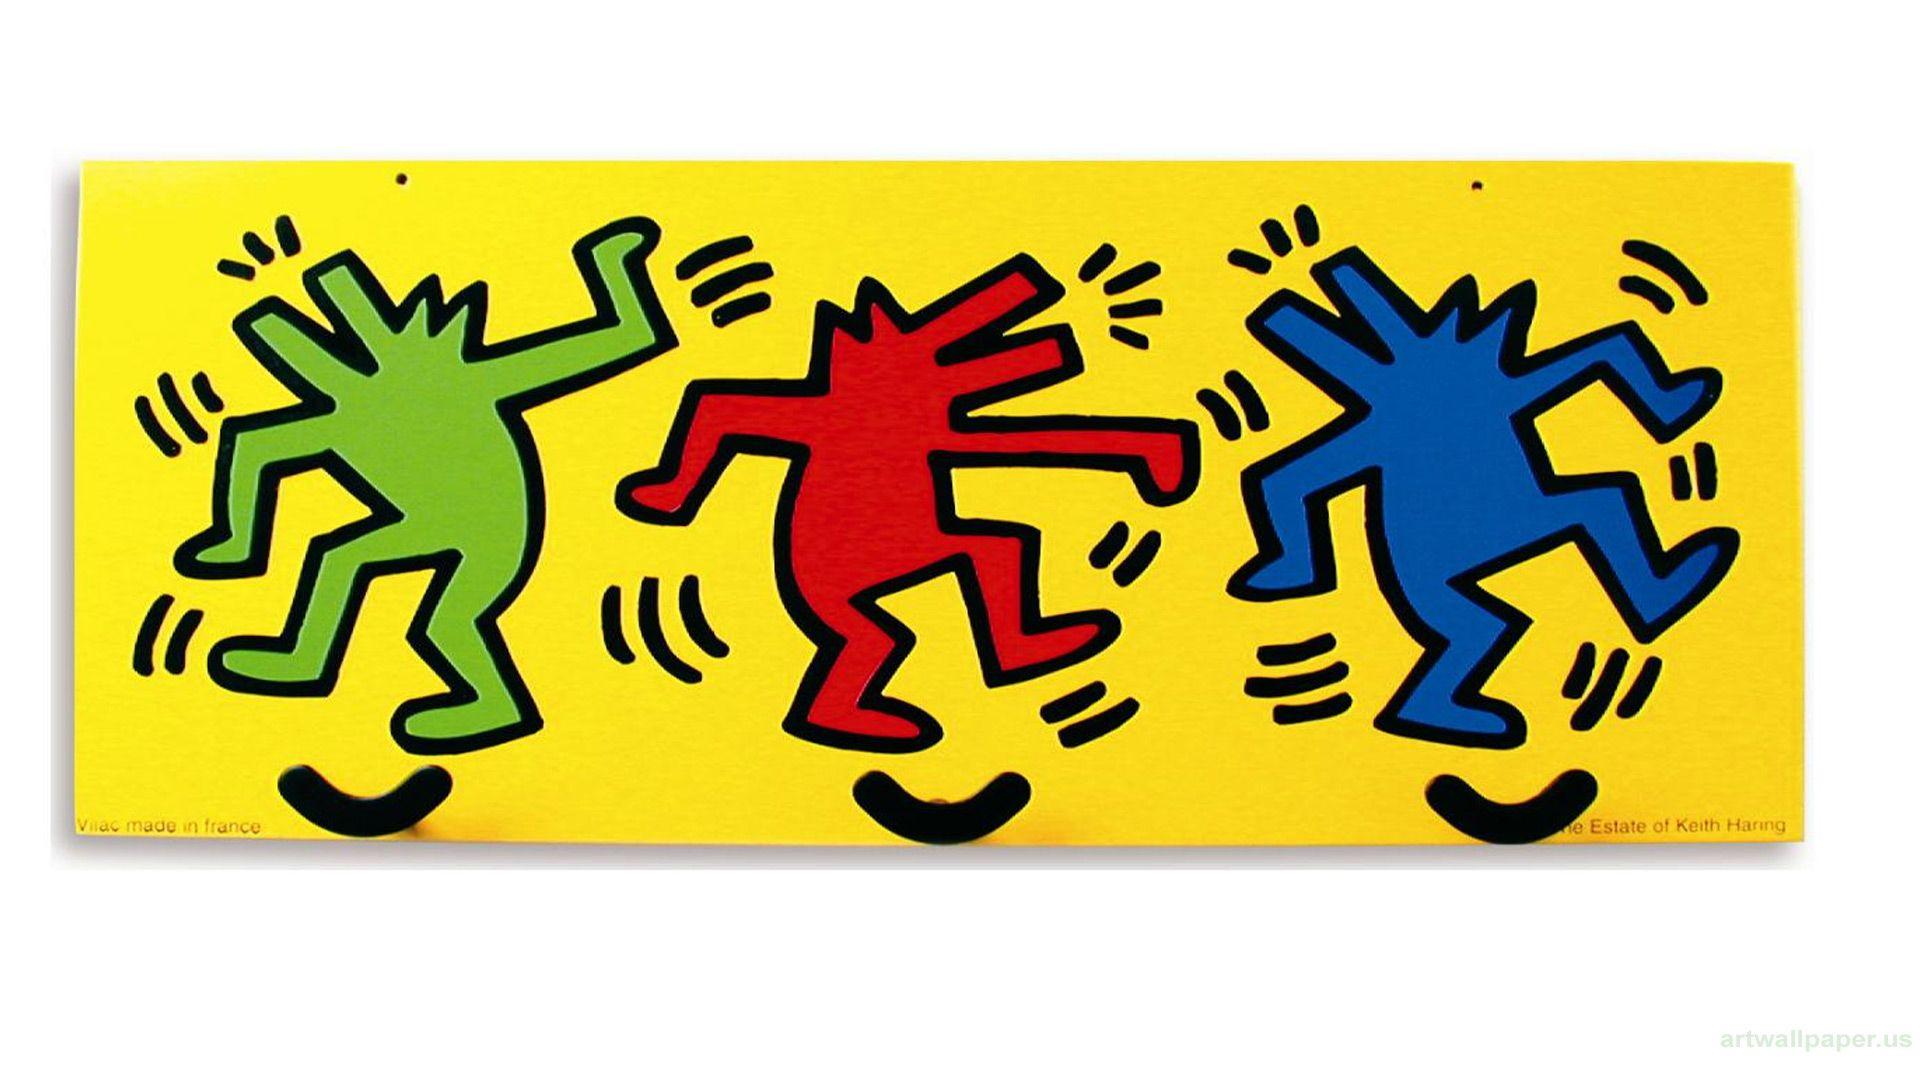 Keith haring, Pop art wallpapers and Pop art